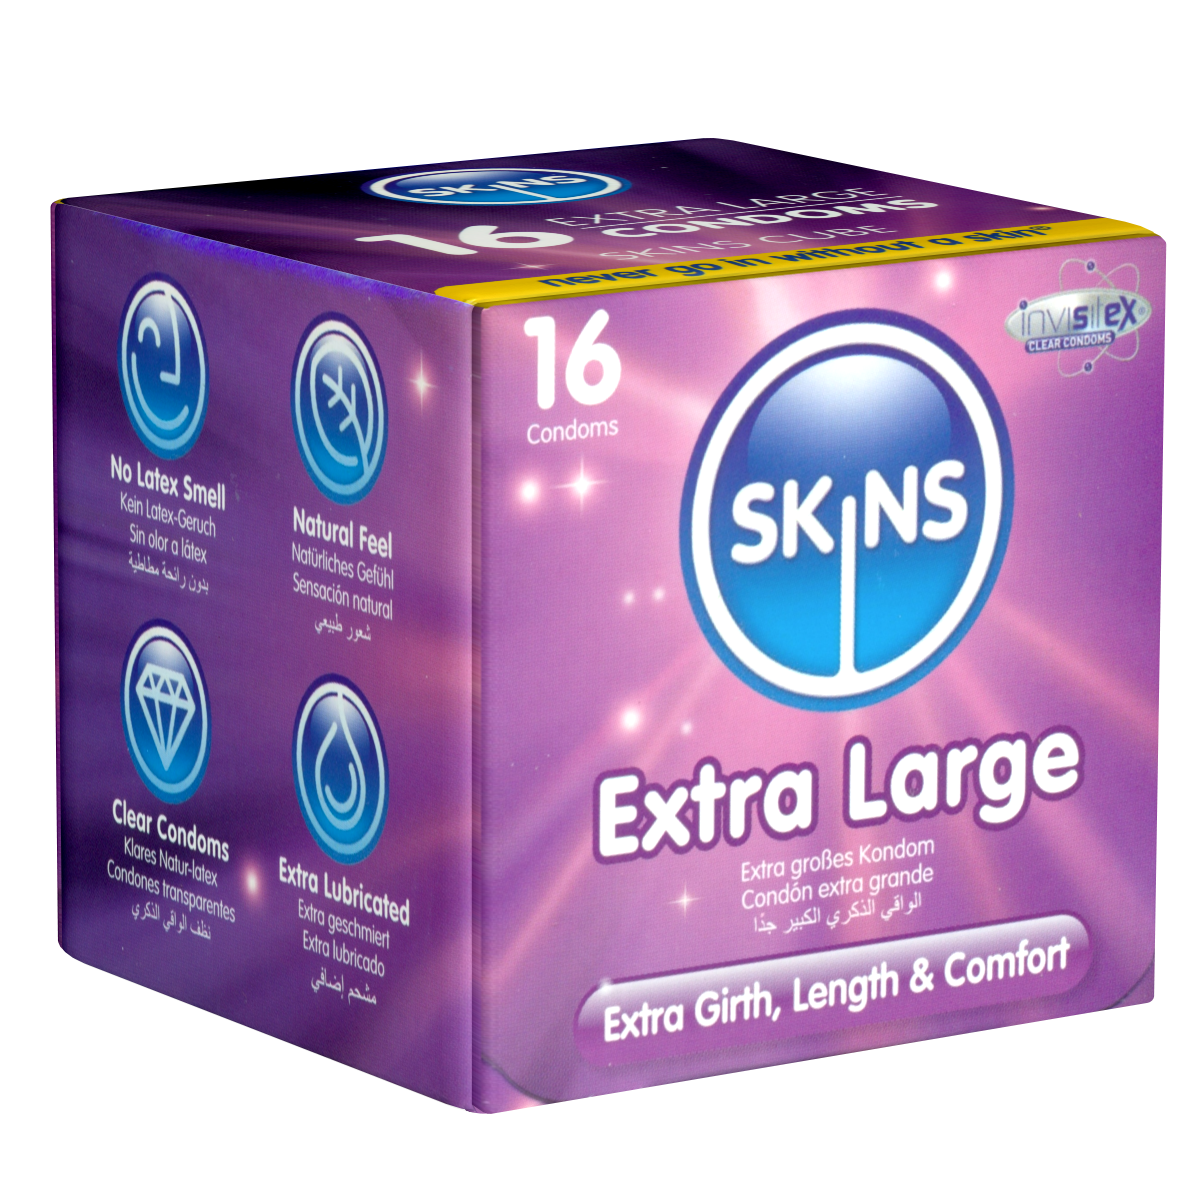 Skins «Extra Large» 16 XXL condoms made of crystal clear latex - without latex smell